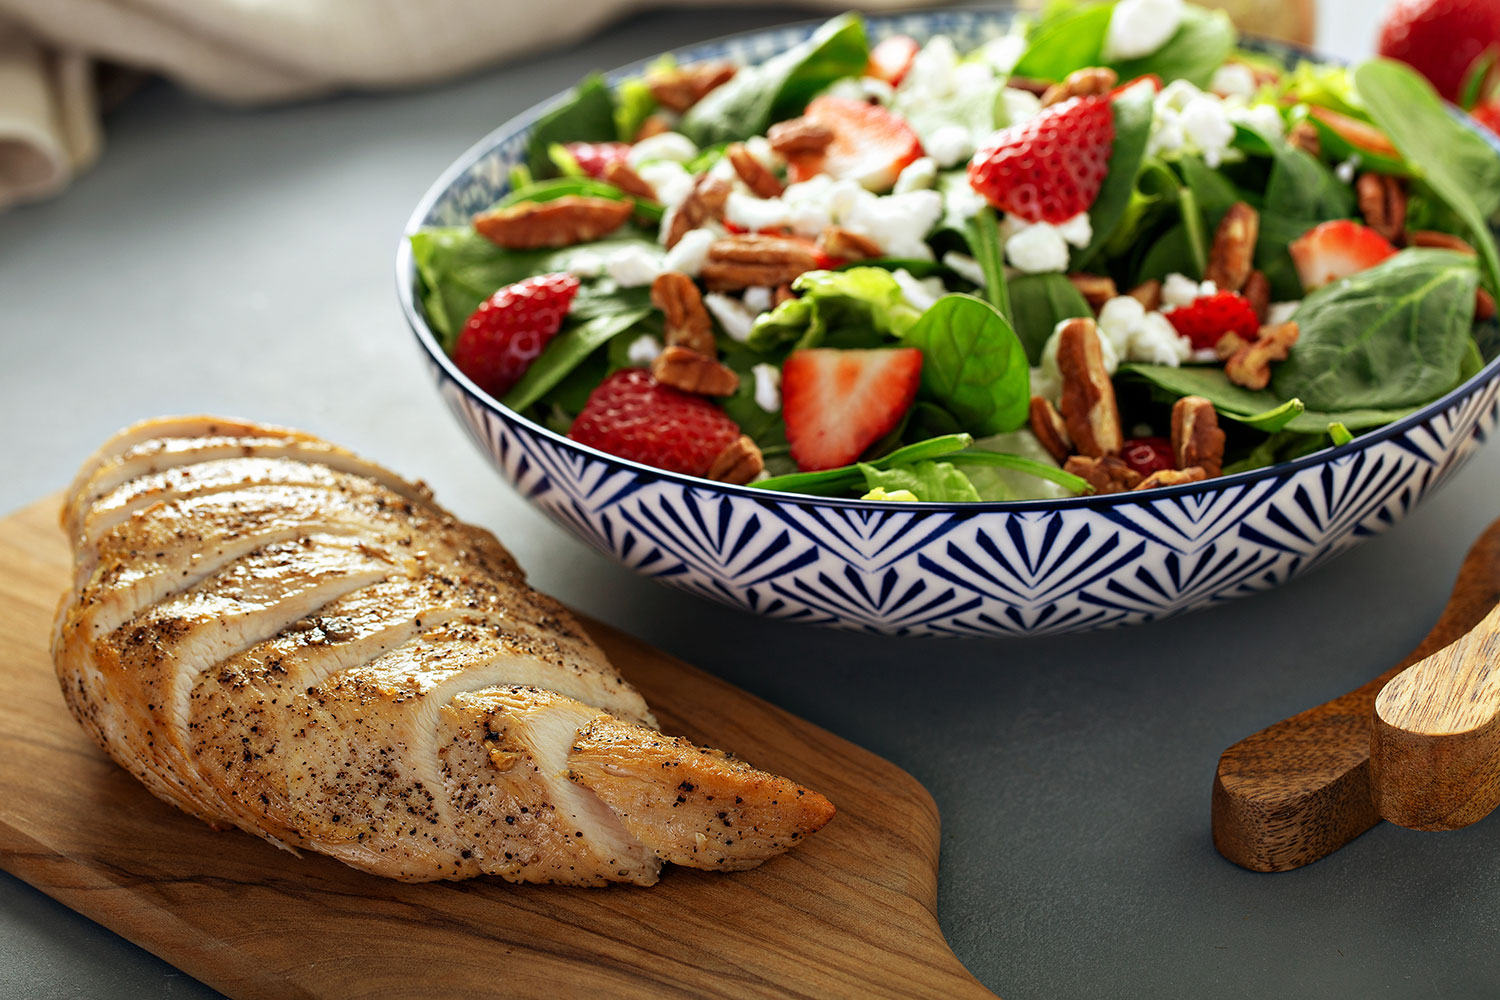 fresh spinach salad with strawberries, feta cheese, halved walnuts in a bowl. slices of grilled chicken displayed on a wood cutting board